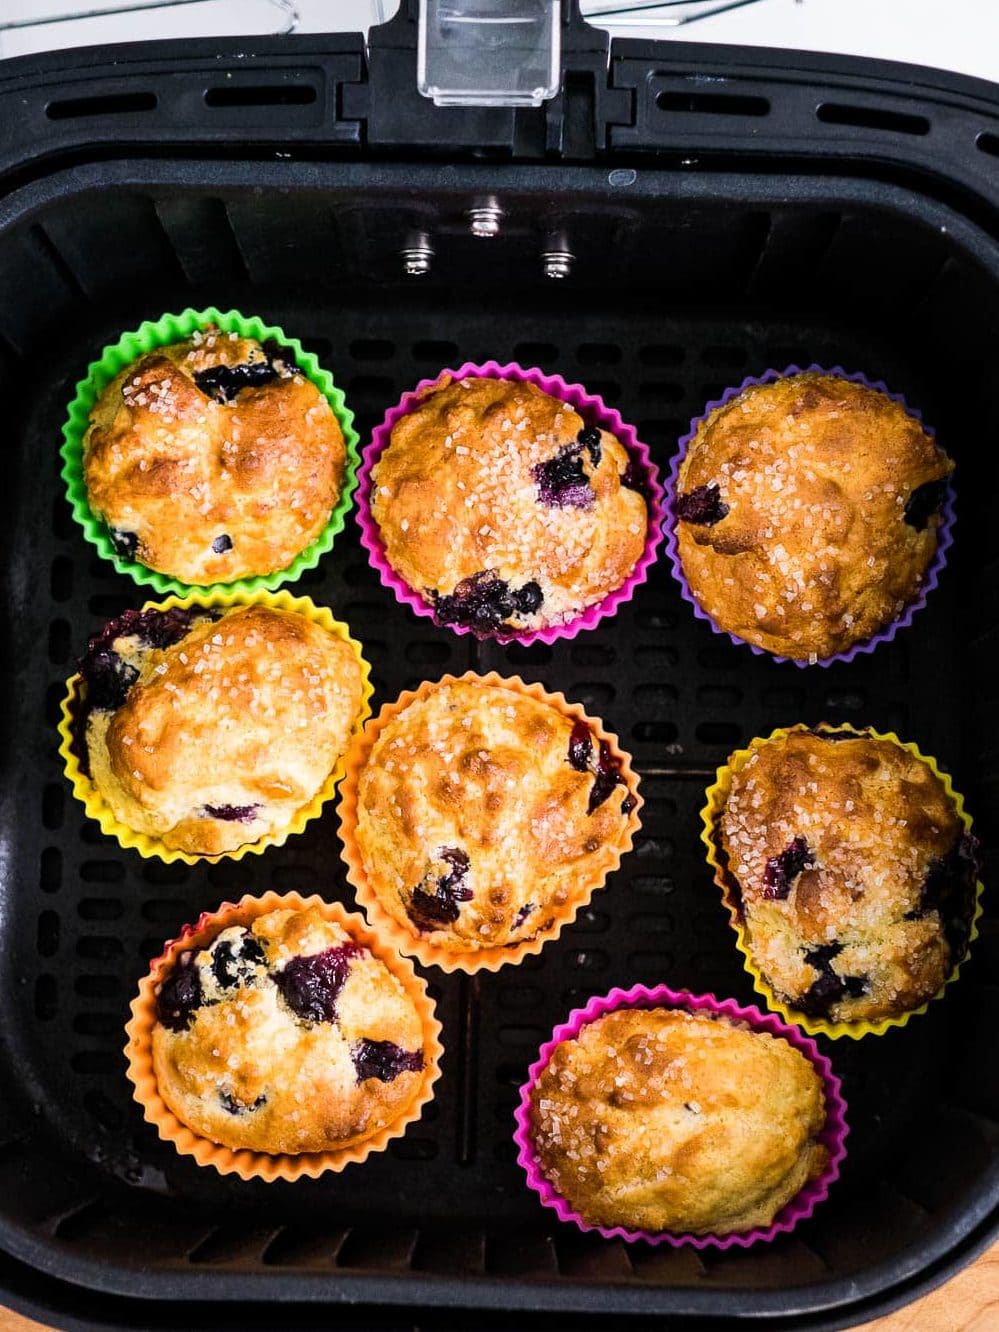 blueberry muffins after air frying